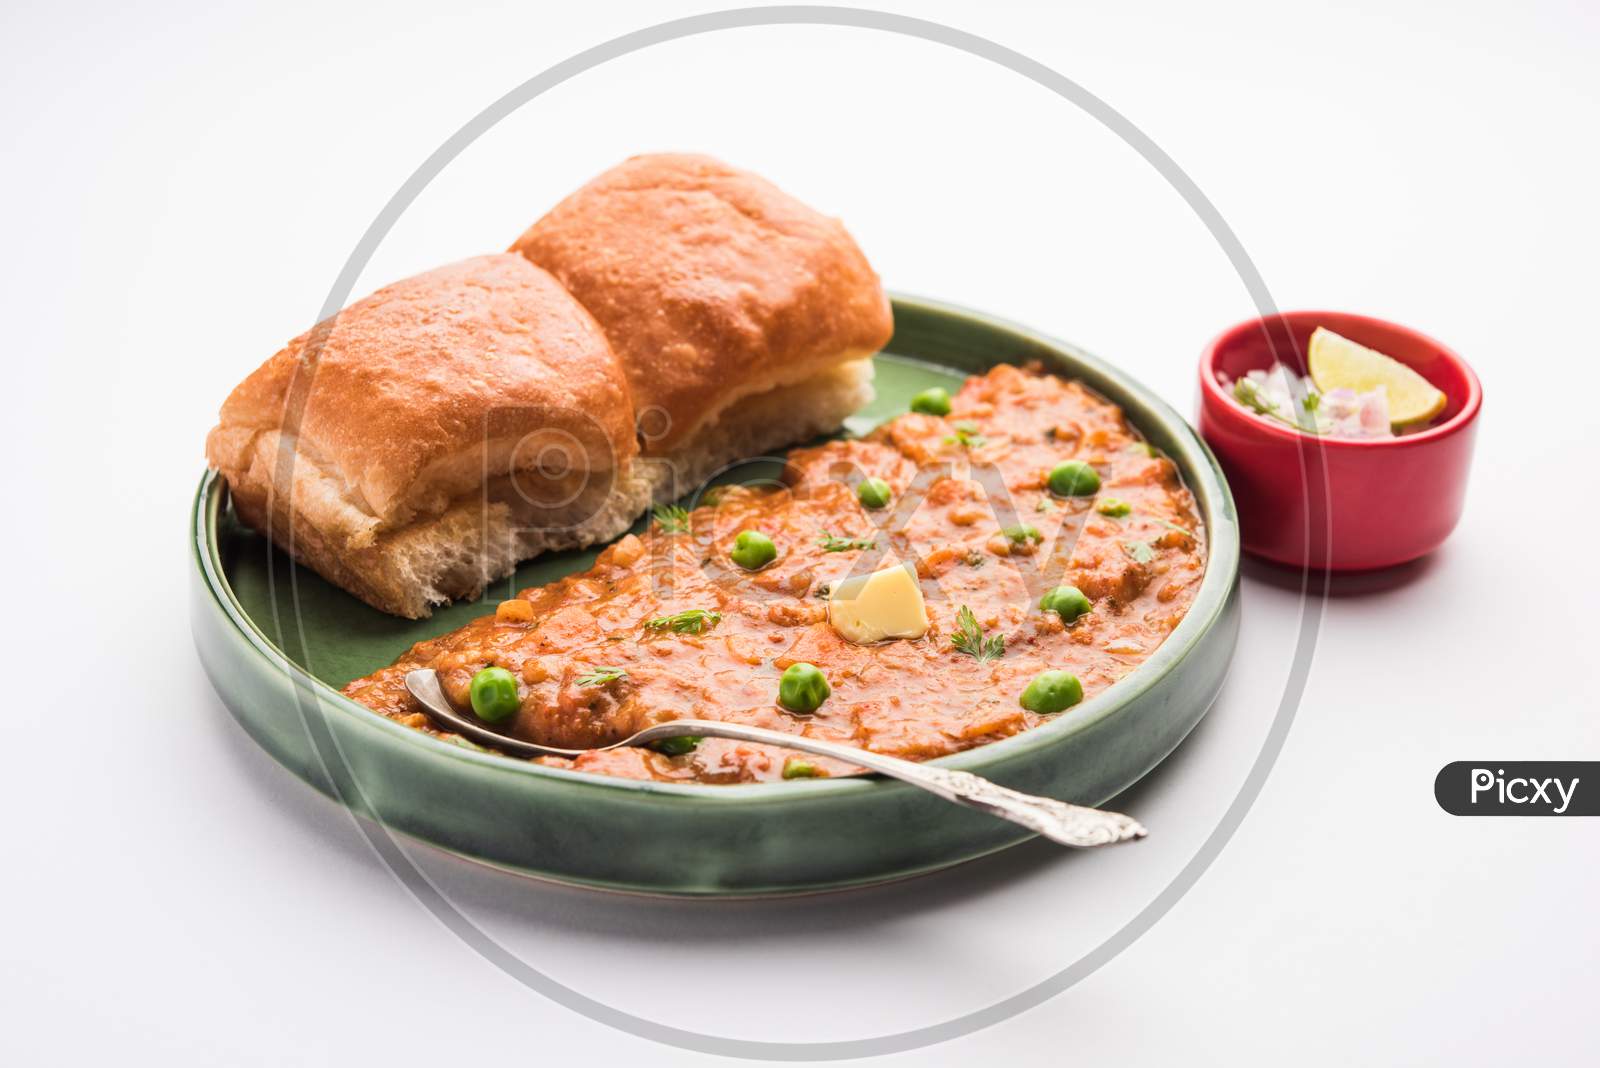 Pav Bhaji Is A Popular Indian Street Food That Consists Of A Spicy Mix Vegetable Mash & Soft Buns